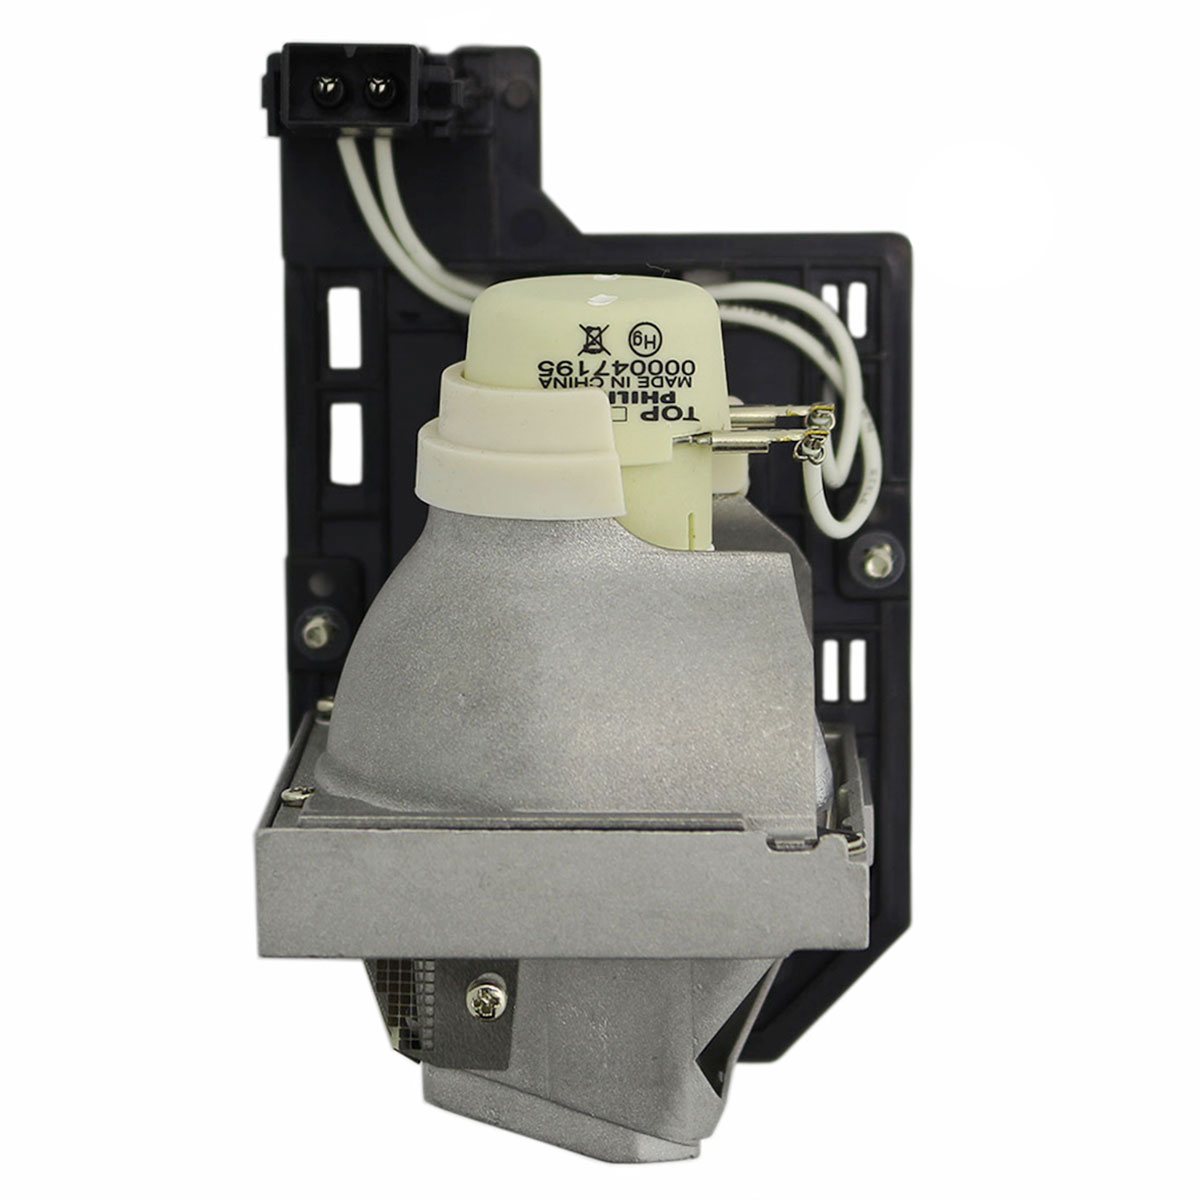 OEM SP.8RU01GC01 Replacement Lamp & Housing for Optoma Projectors - image 4 of 7